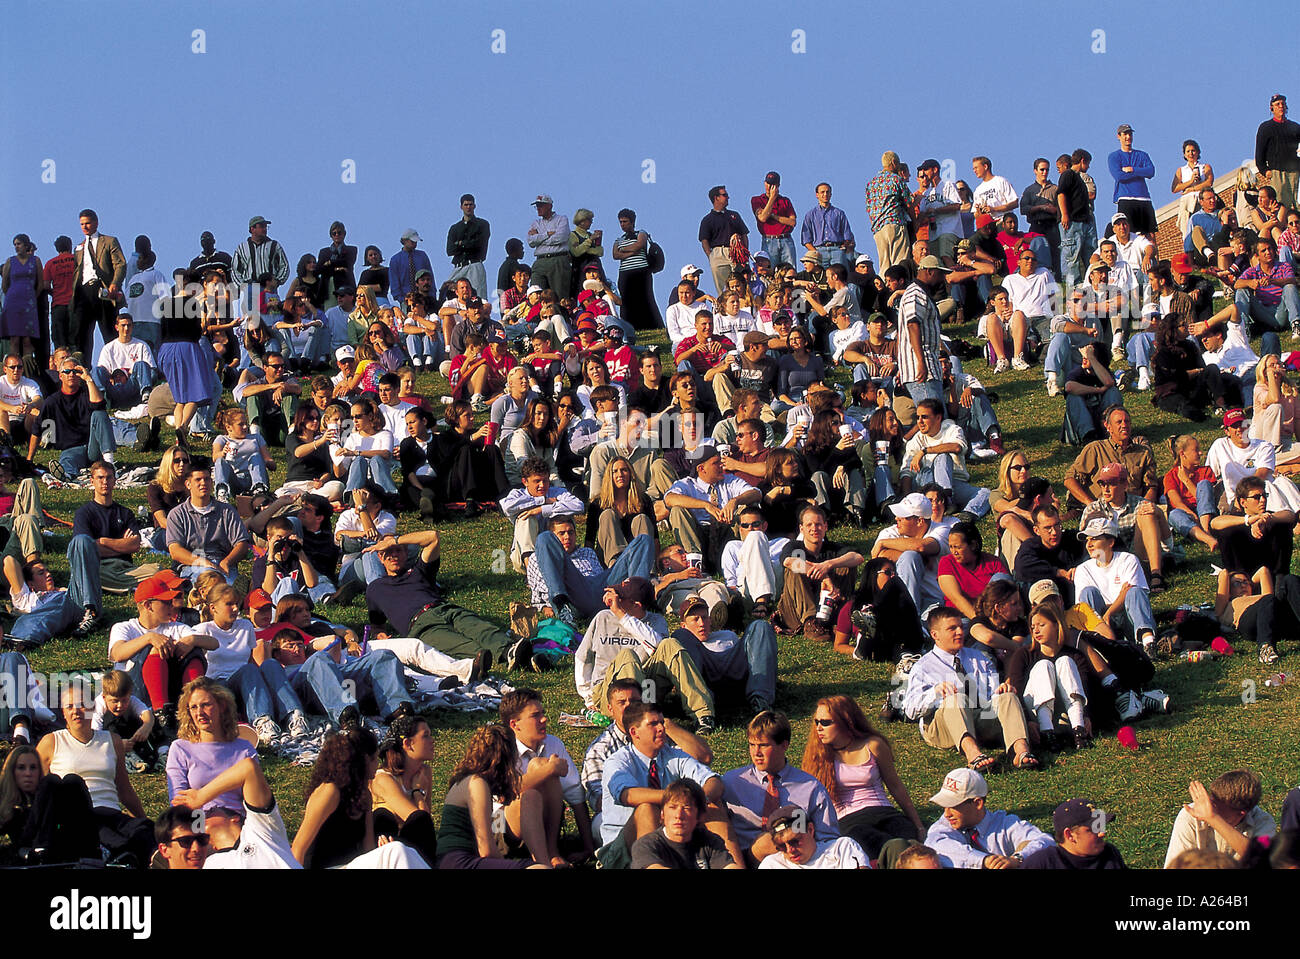 CROWD OF PEOPLE SITTING OUTSIDE ON GRASS SLOPE Stock Photo